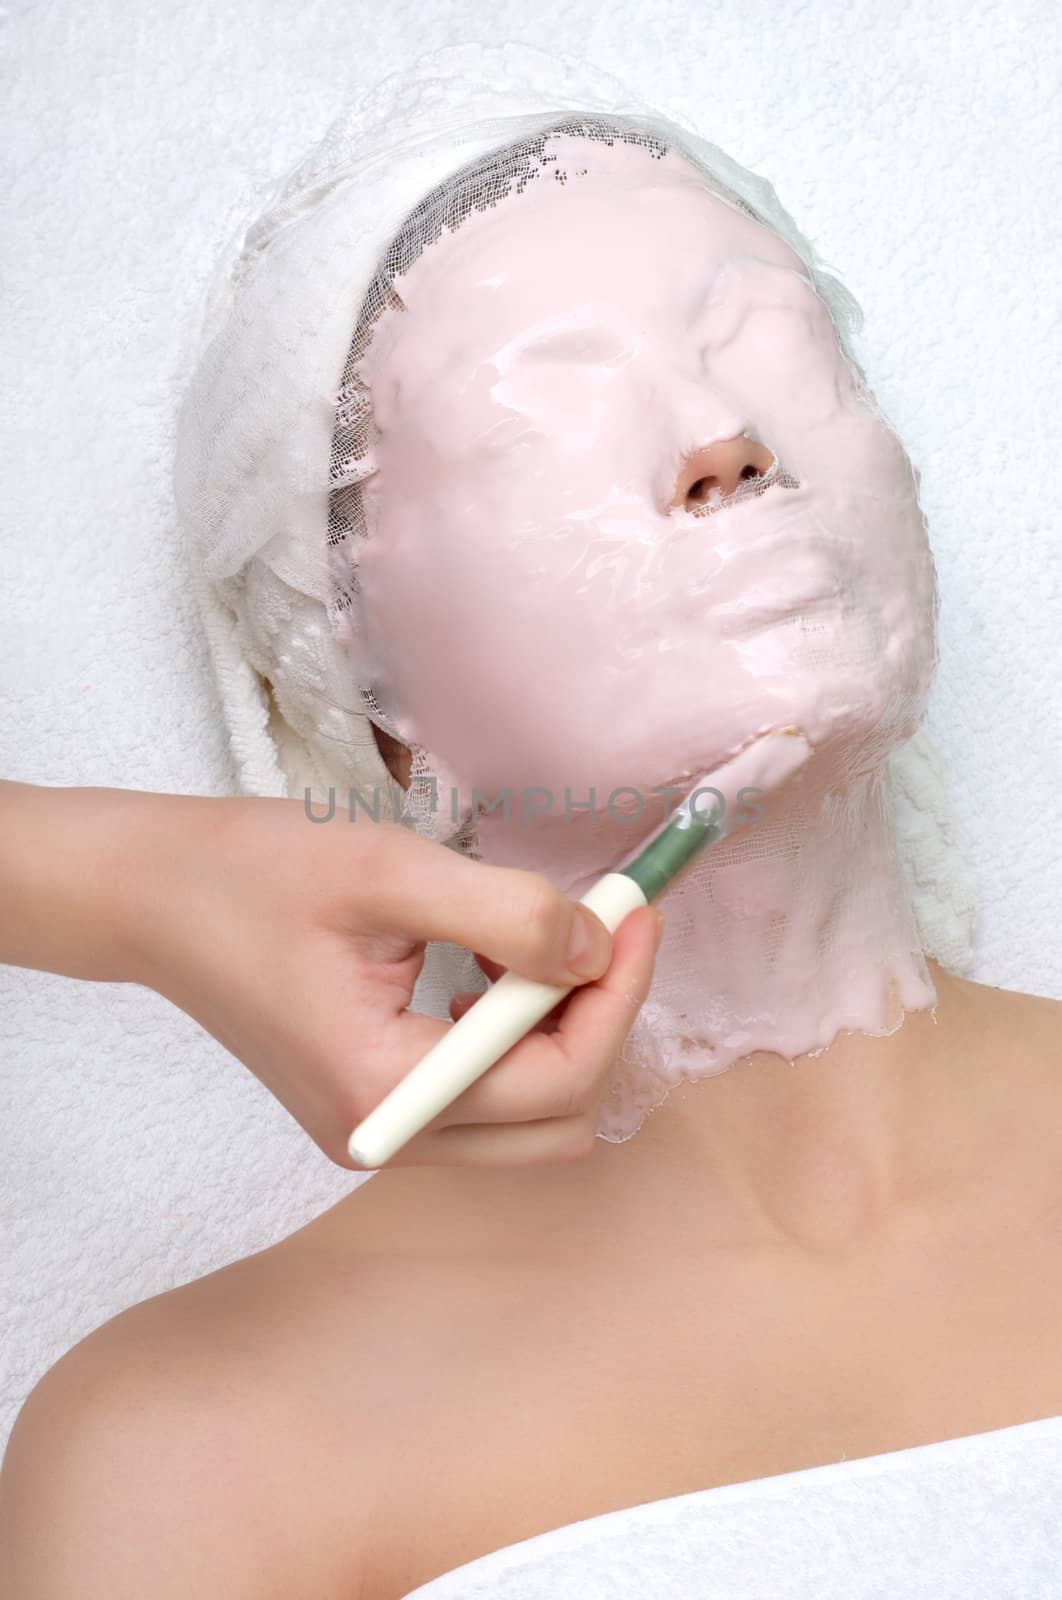 beauty salon series , applying the cleaning facial mask